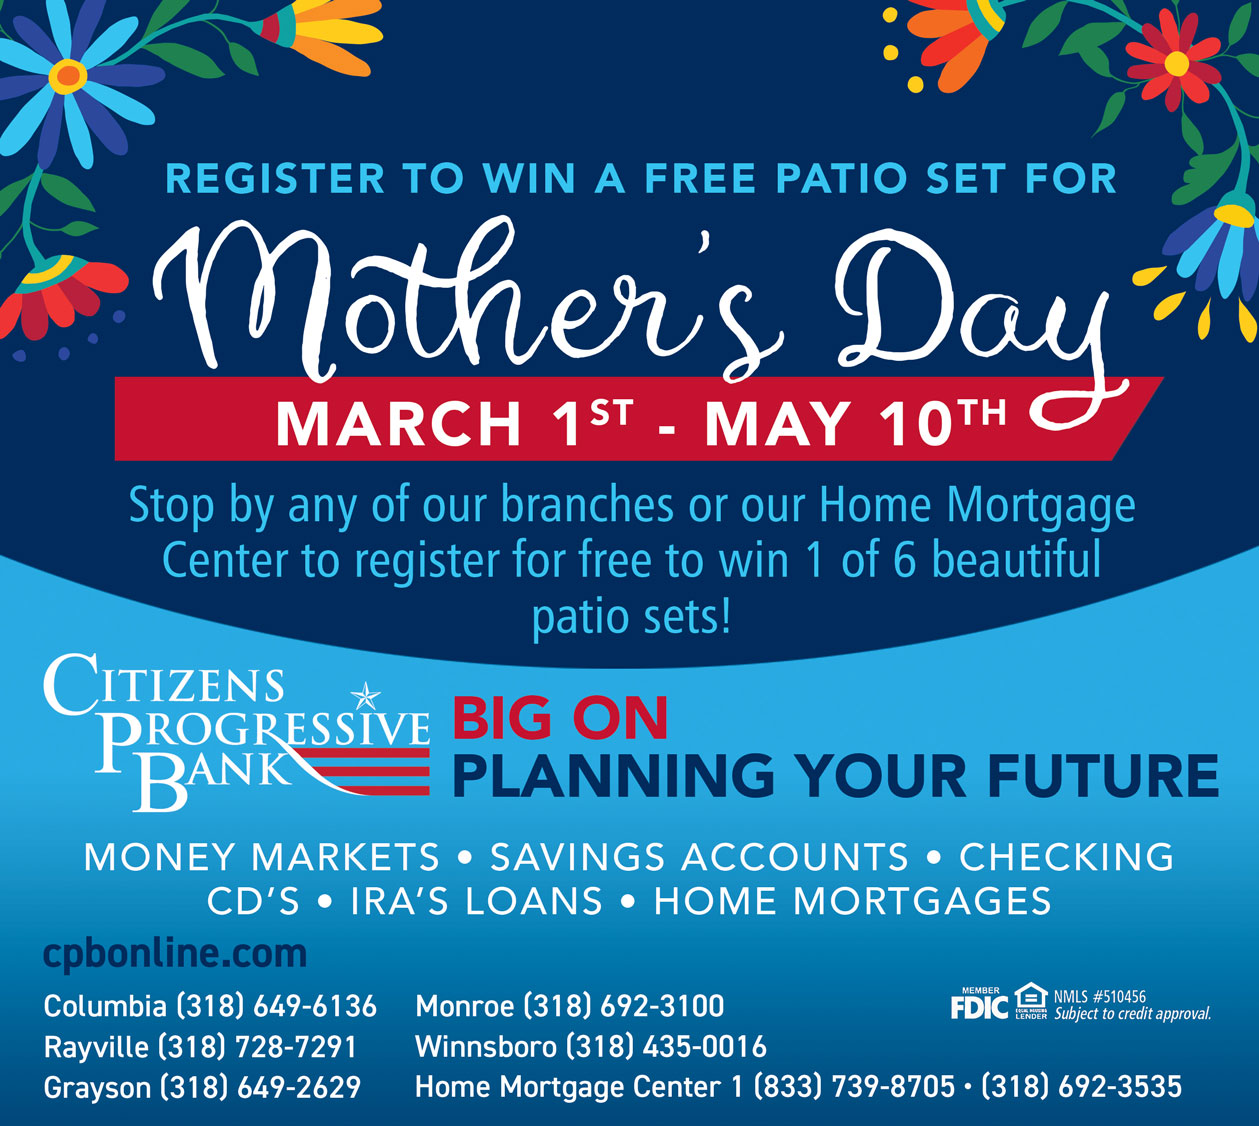 Register to win a free patio set for Mother's Day